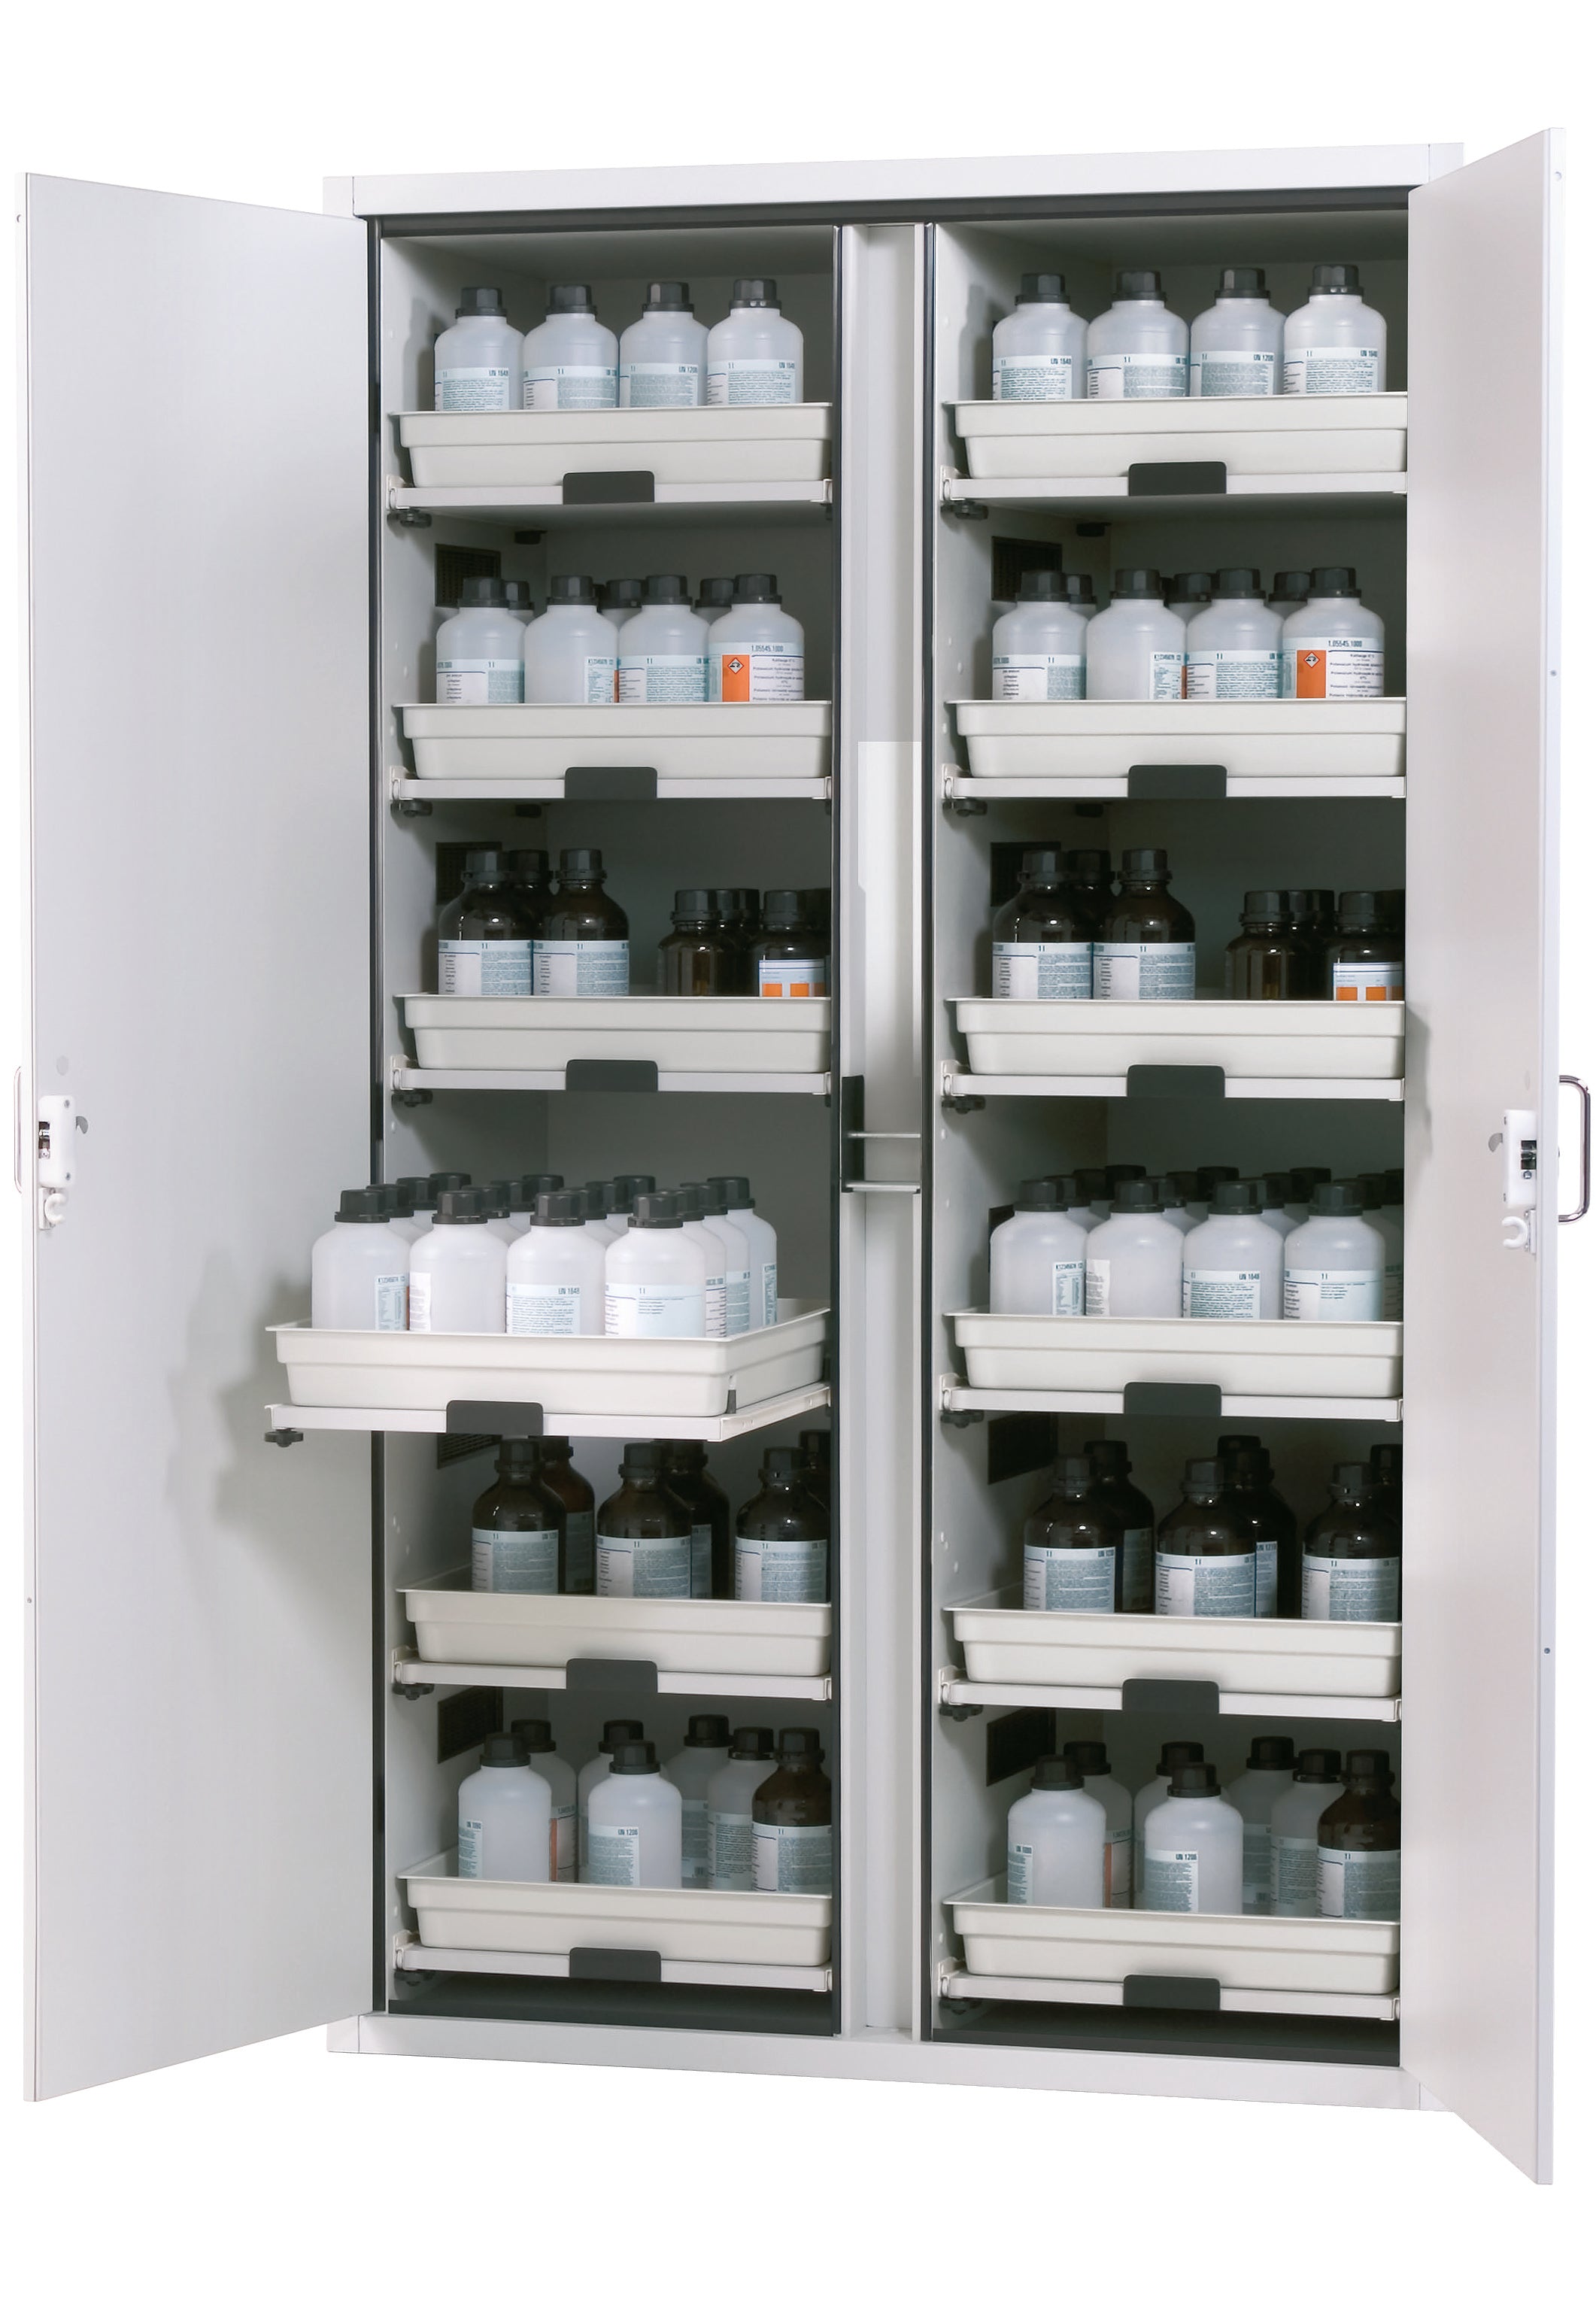 Acid and alkaline cabinet SL-CLASSIC model SL.196.120.MV in light gray RAL 7035 with 12x AbZ pull-out shelves (FP plate/polypropylene)